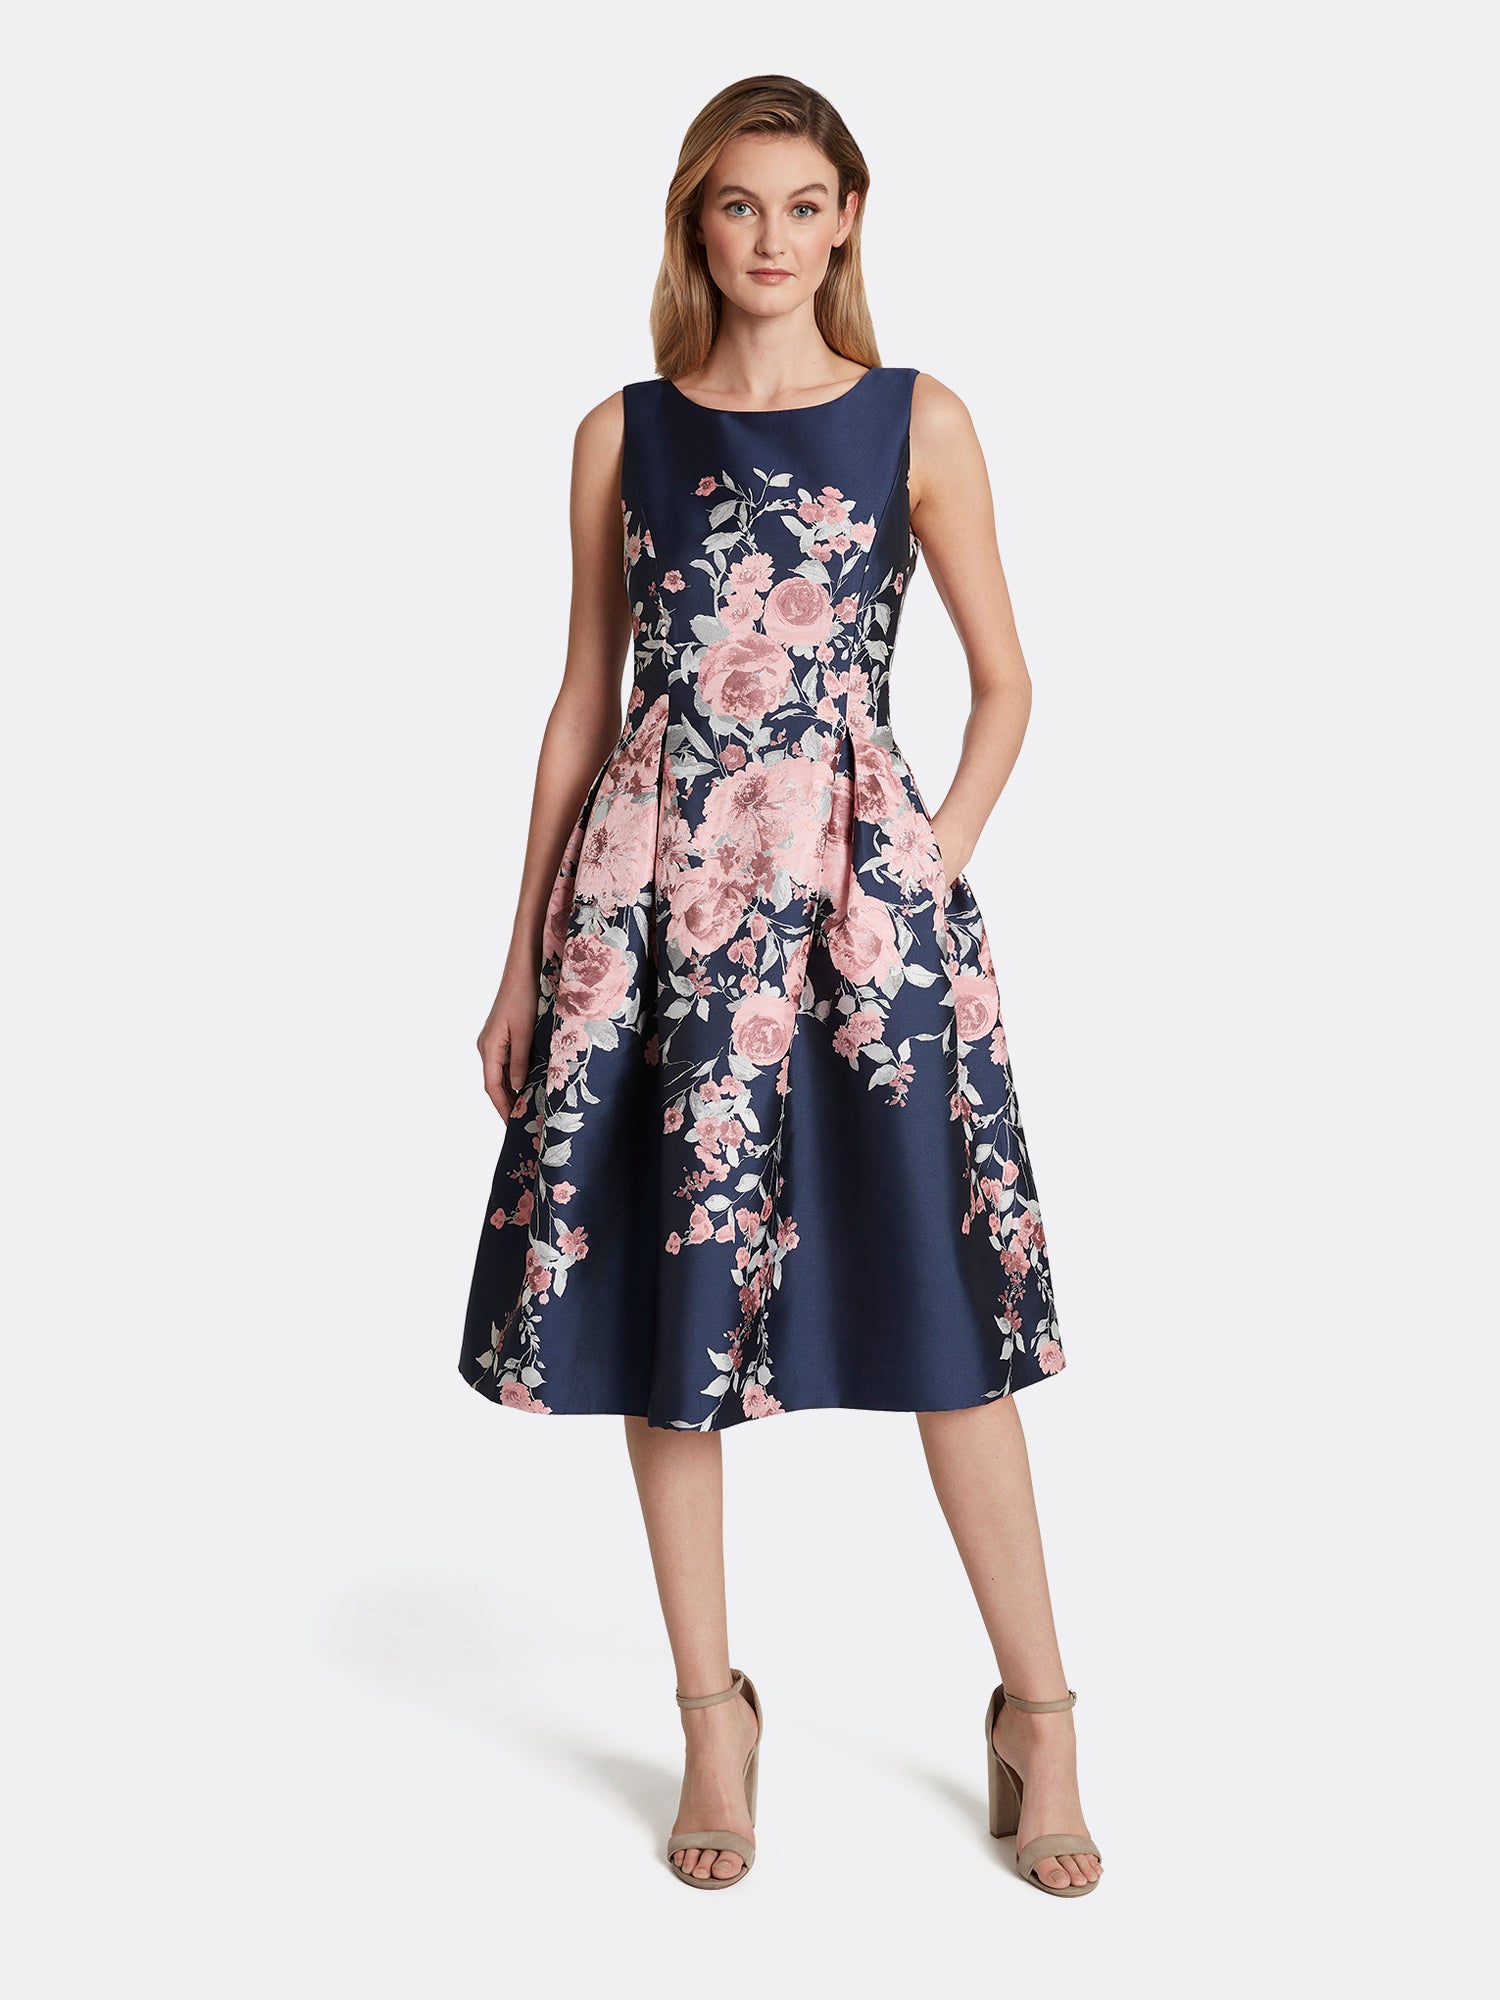 tahari embroidered fit and flare dress